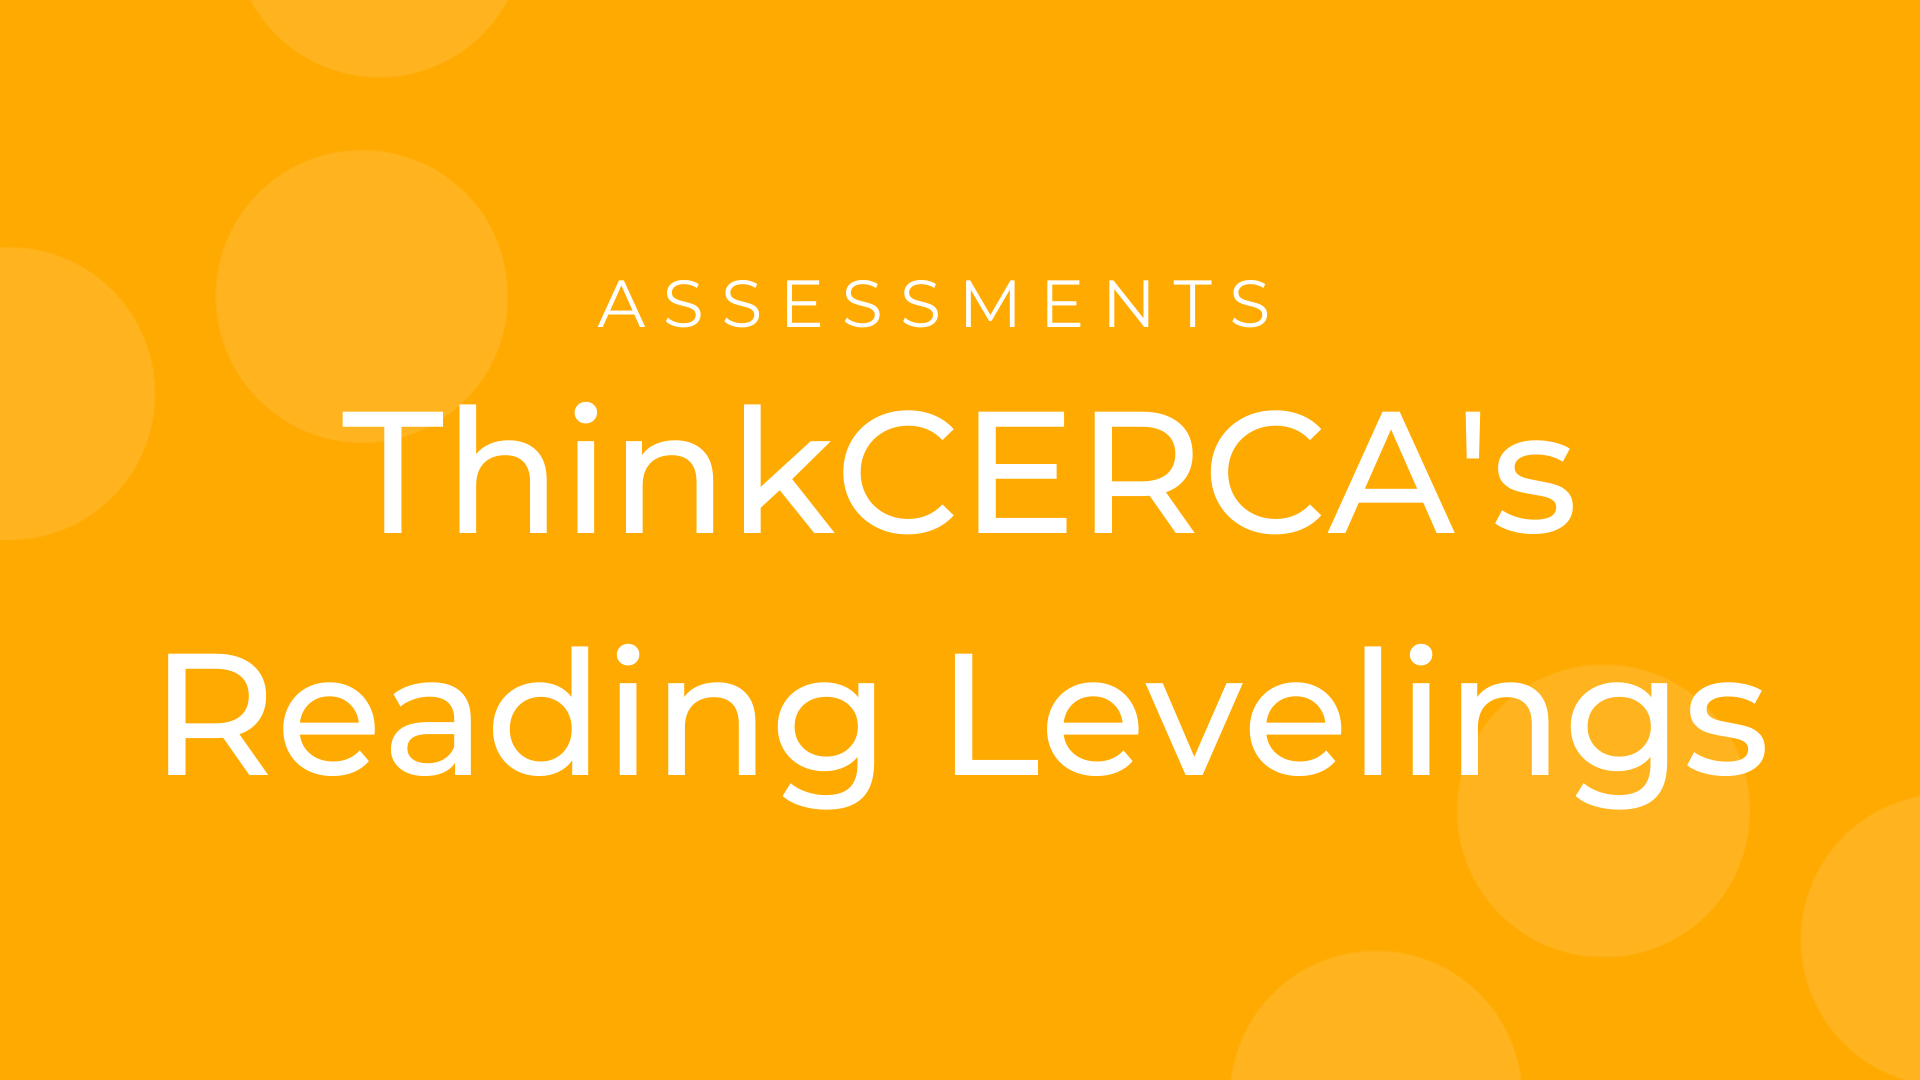 Assigning Reading Levelings